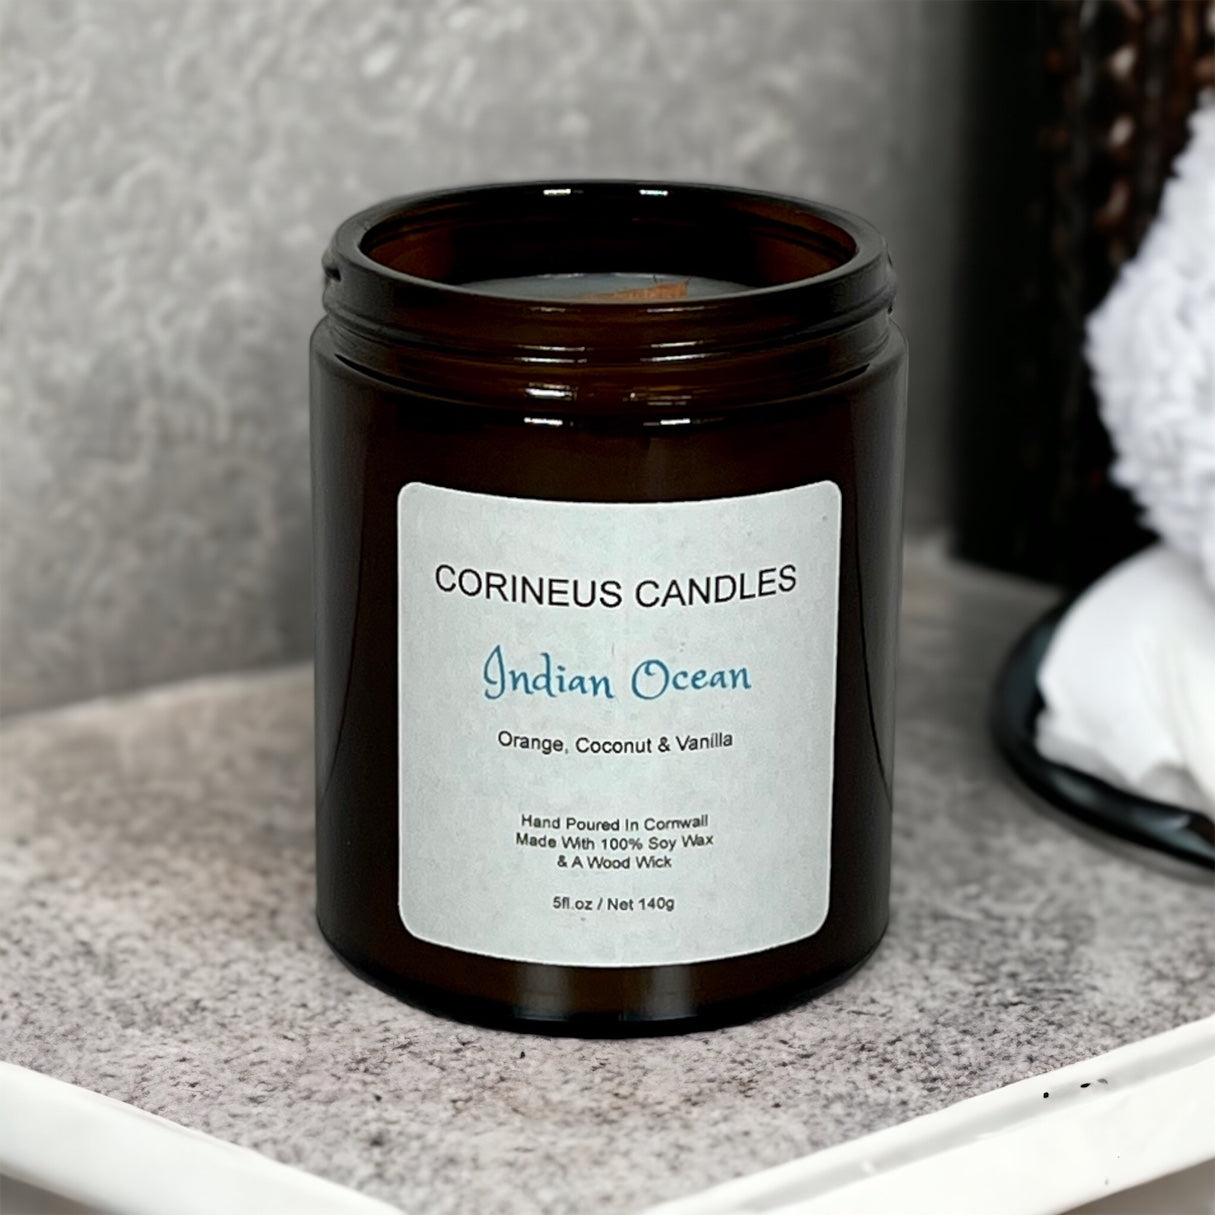 Eau de mer and Ambre - Coconut and Soy Wood Wick Candle – Ohra Creations